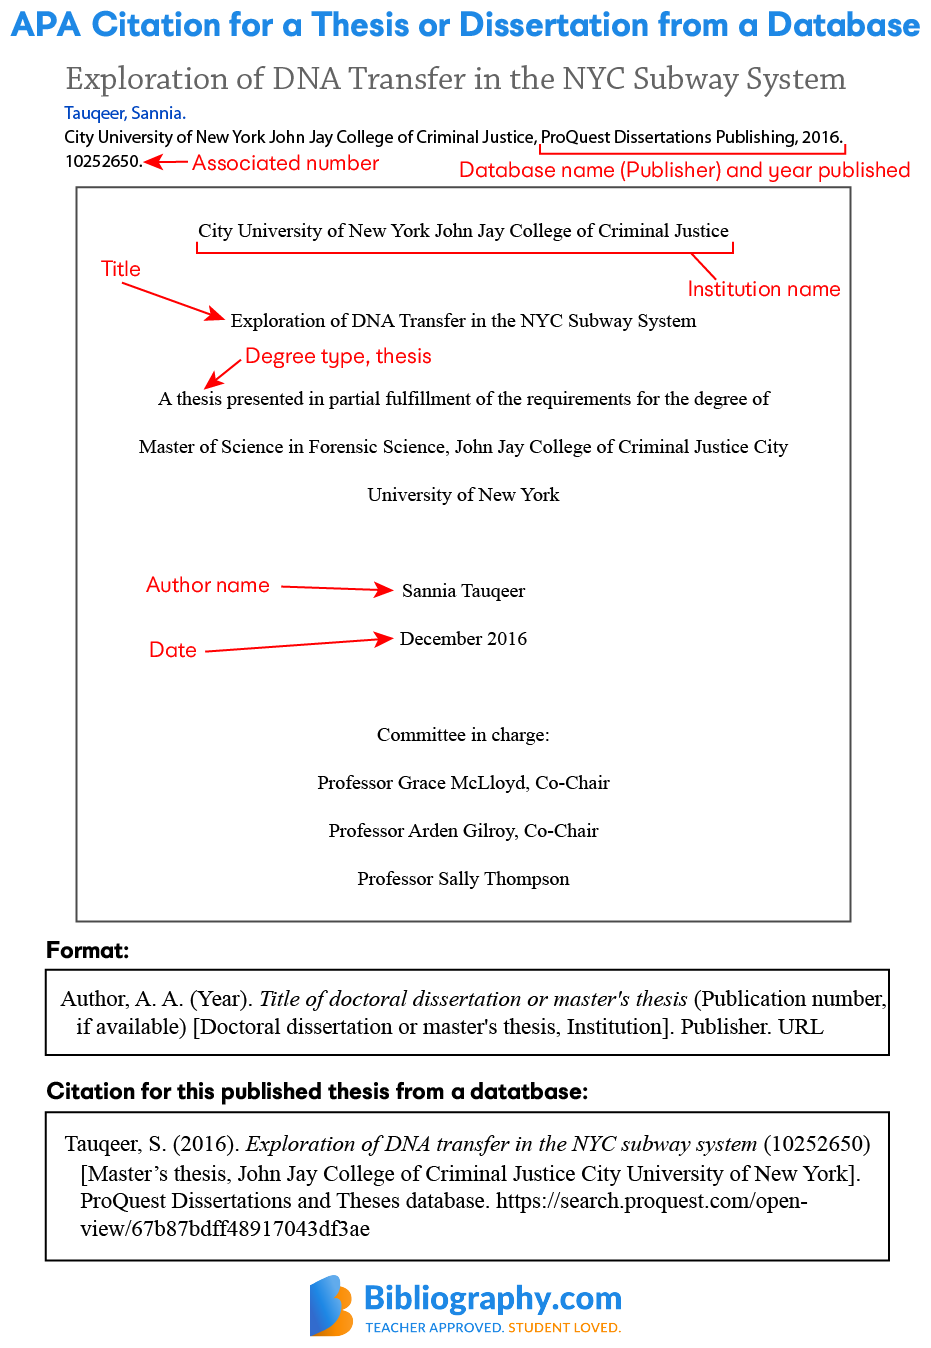 APA citation example thesis or dissertation from database